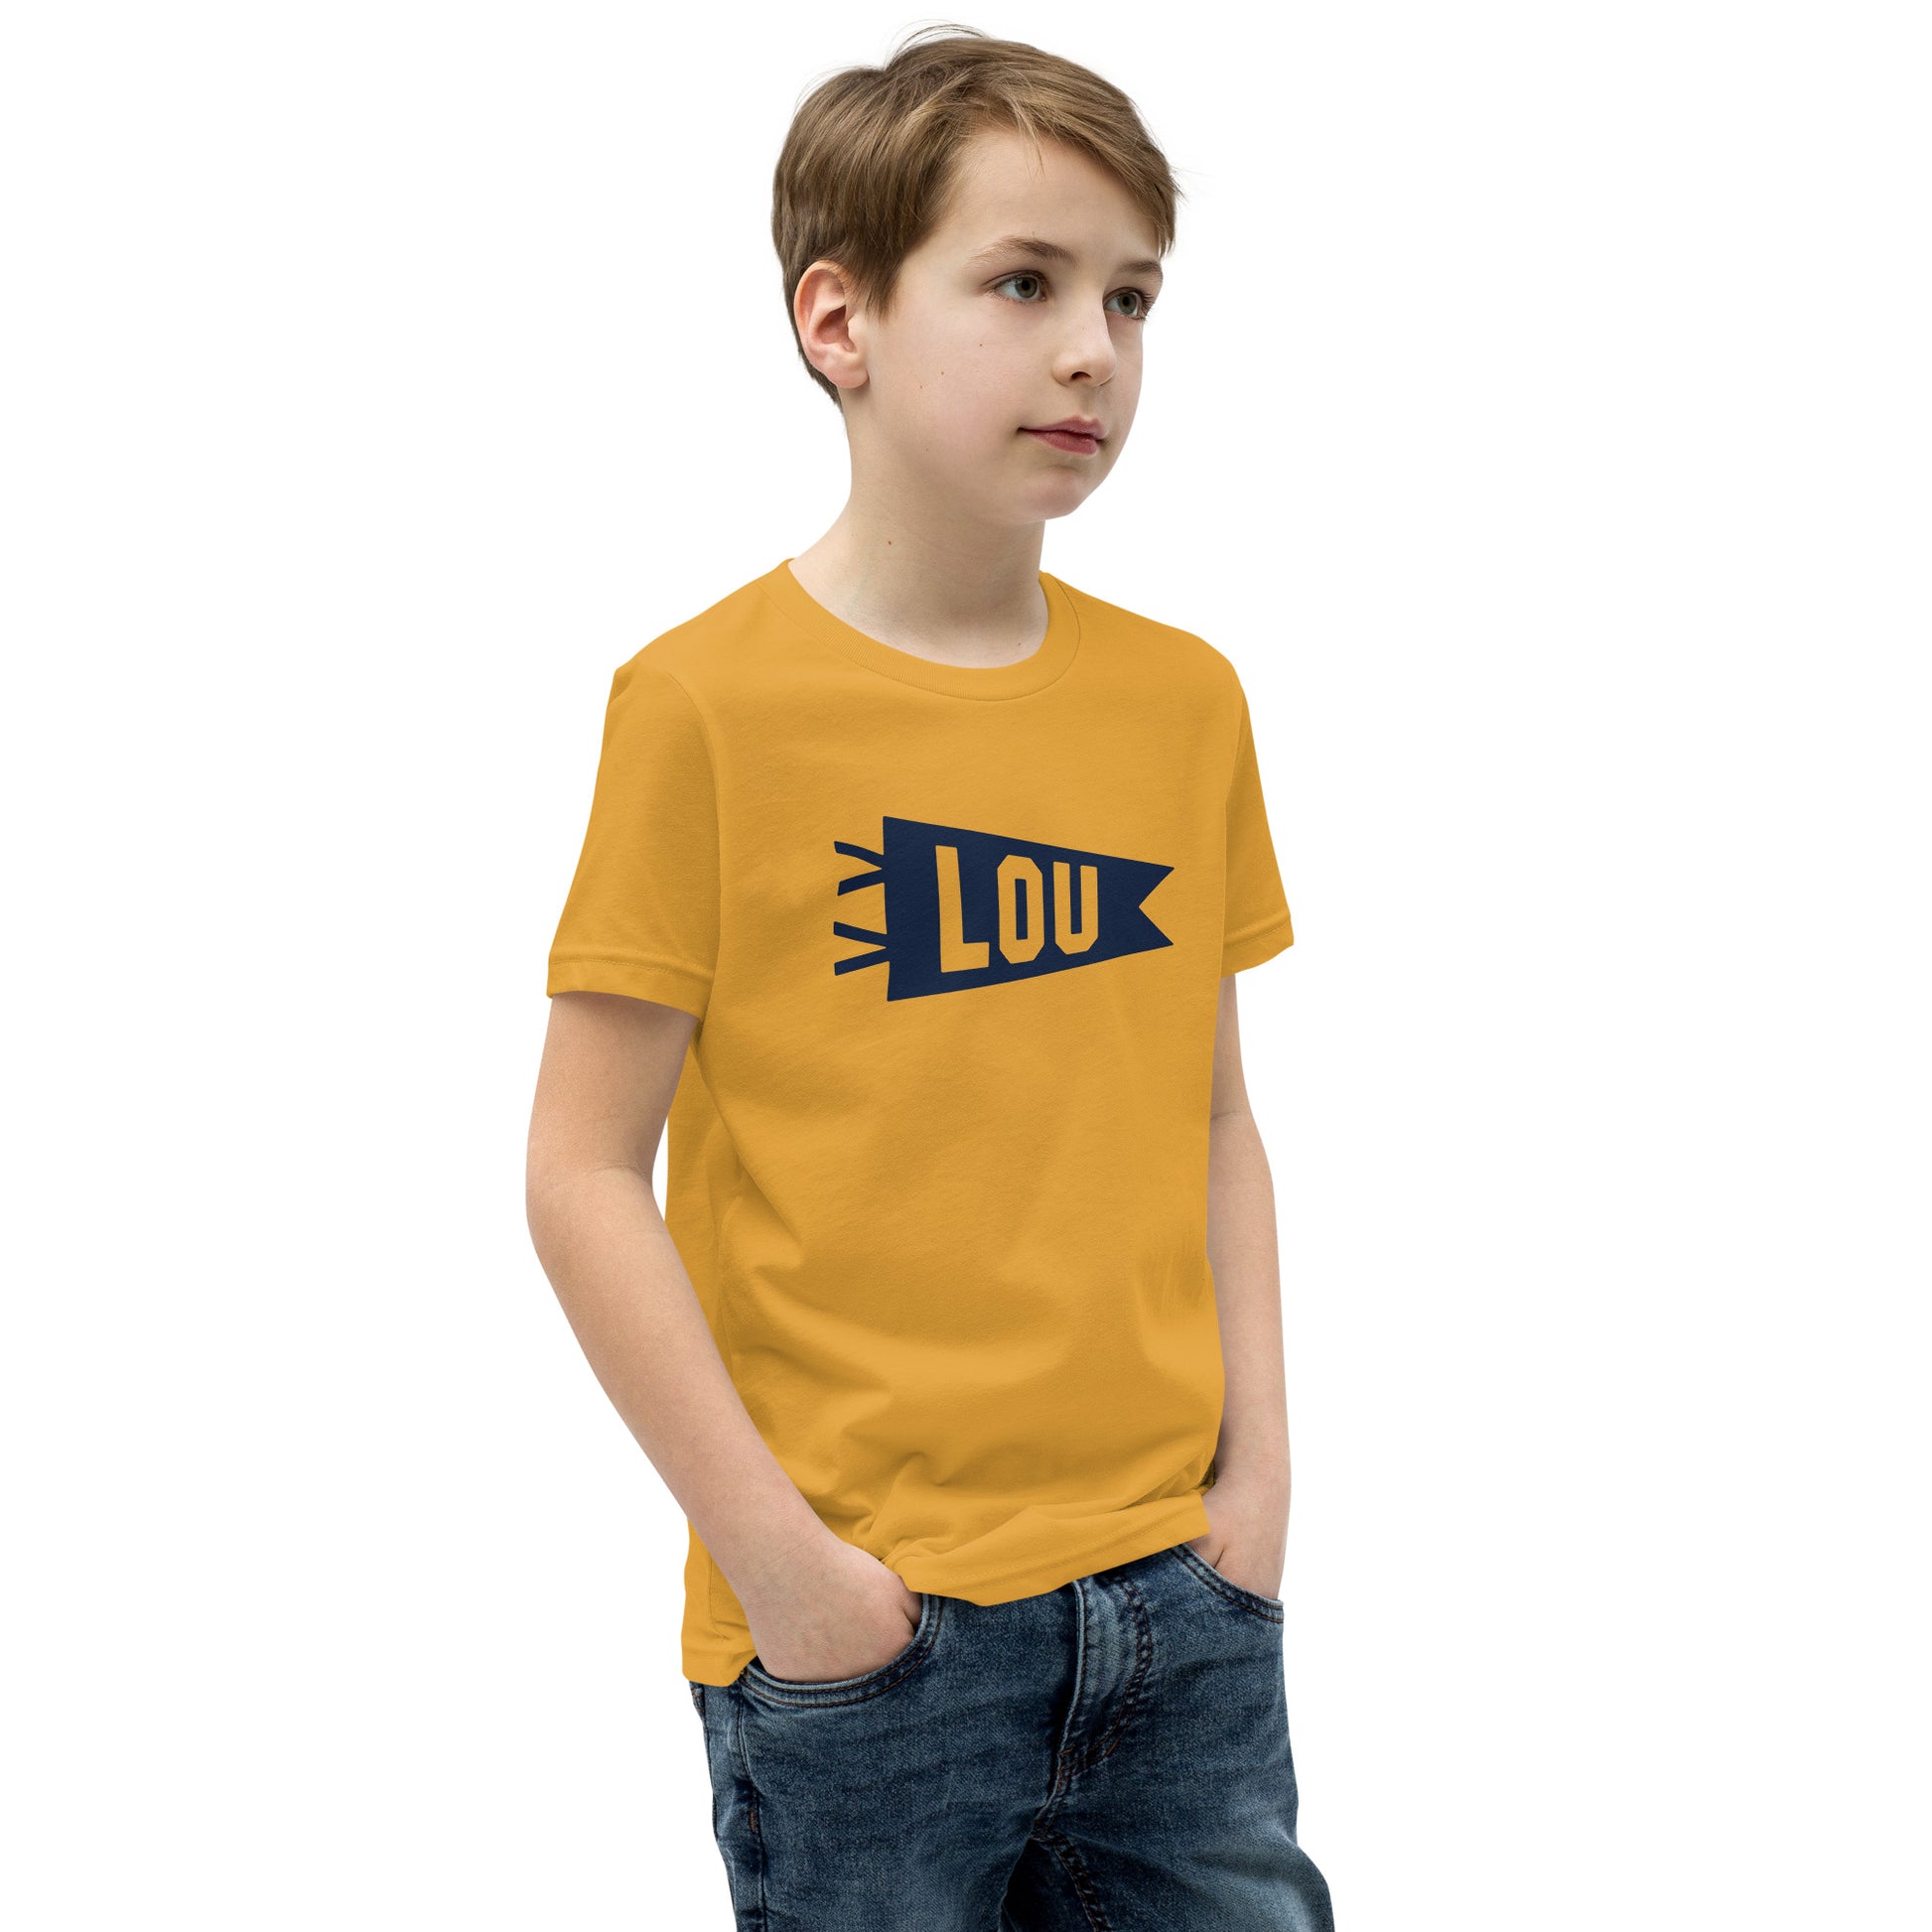 Kid's Airport Code Tee - Navy Blue Graphic • LOU Louisville • YHM Designs - Image 07